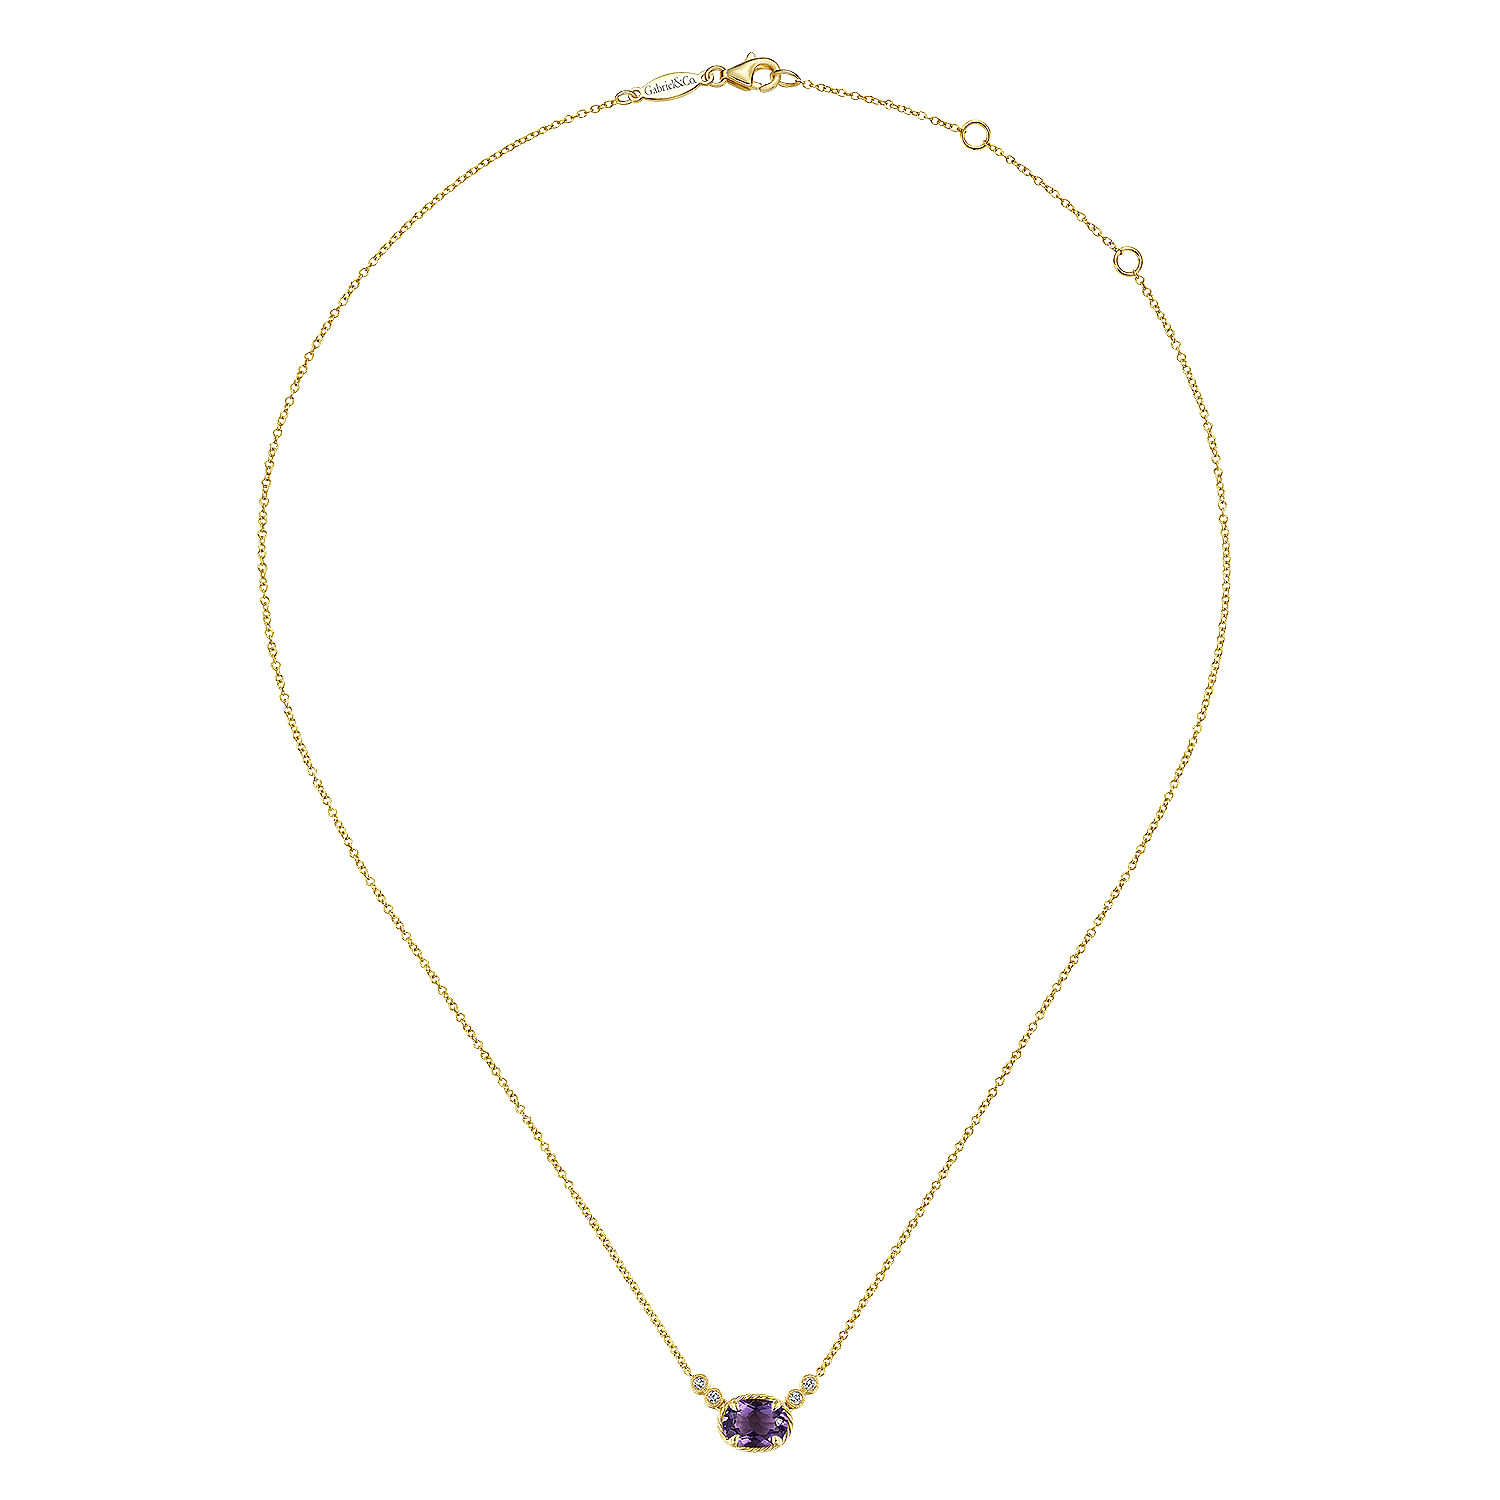 14K Yellow Gold Oval Amethyst Pendant Necklace with Diamond Accents